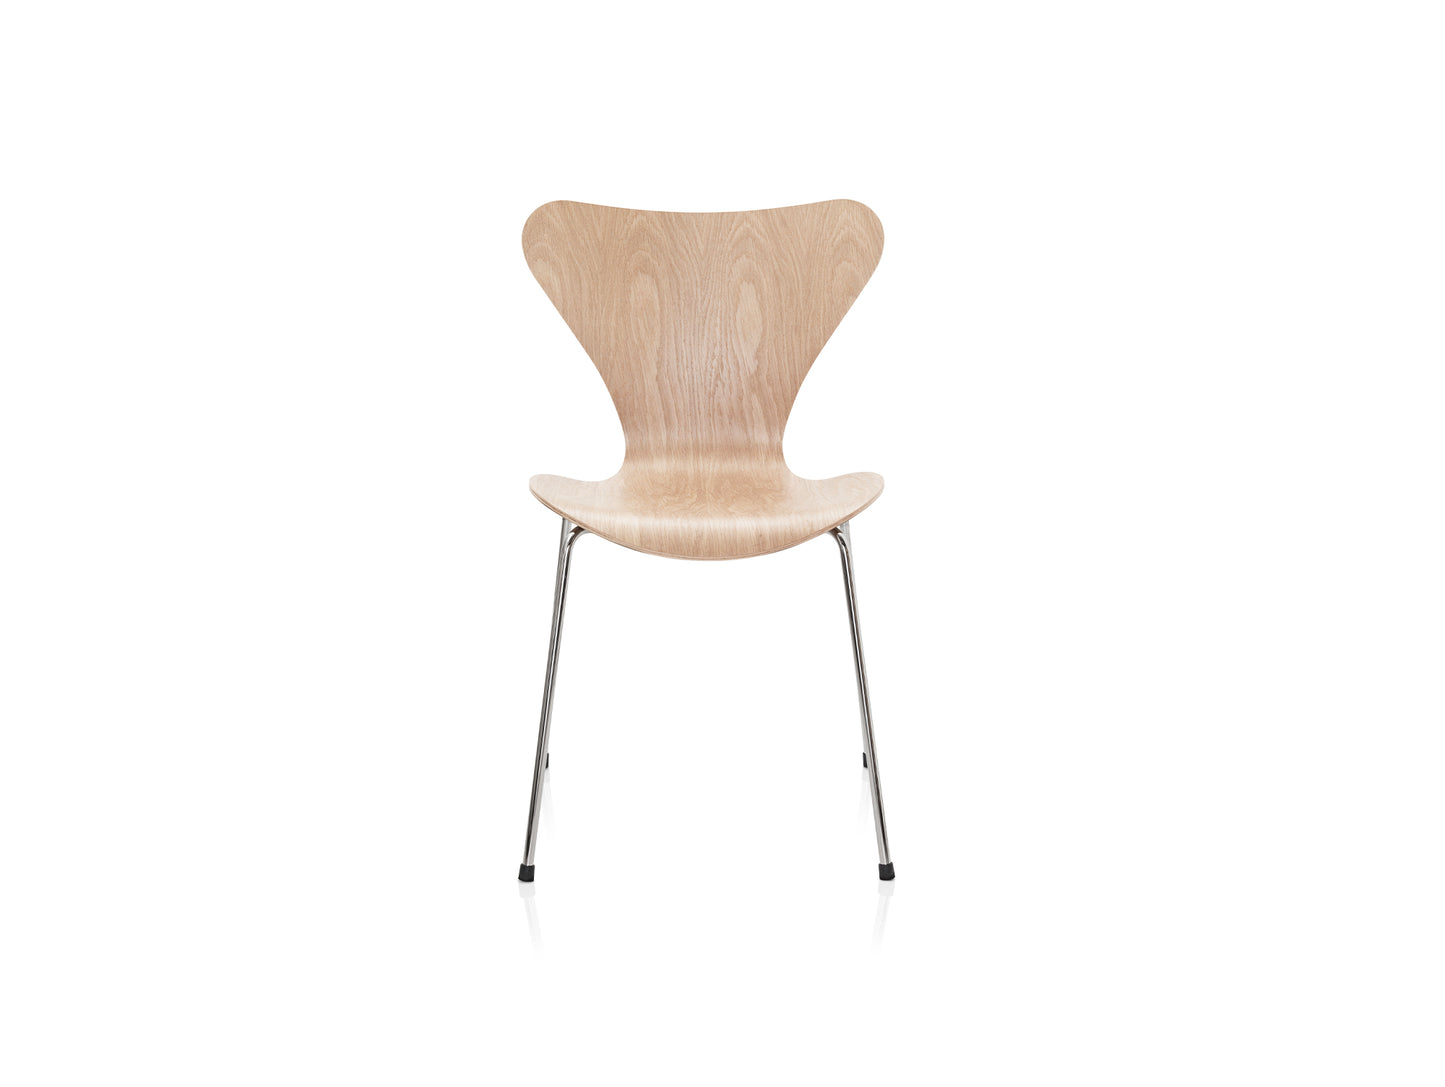 Series 7 Dining Chair (Clear Lacquered Wood) by Fritz Hanse - Oak / Chromed Steel